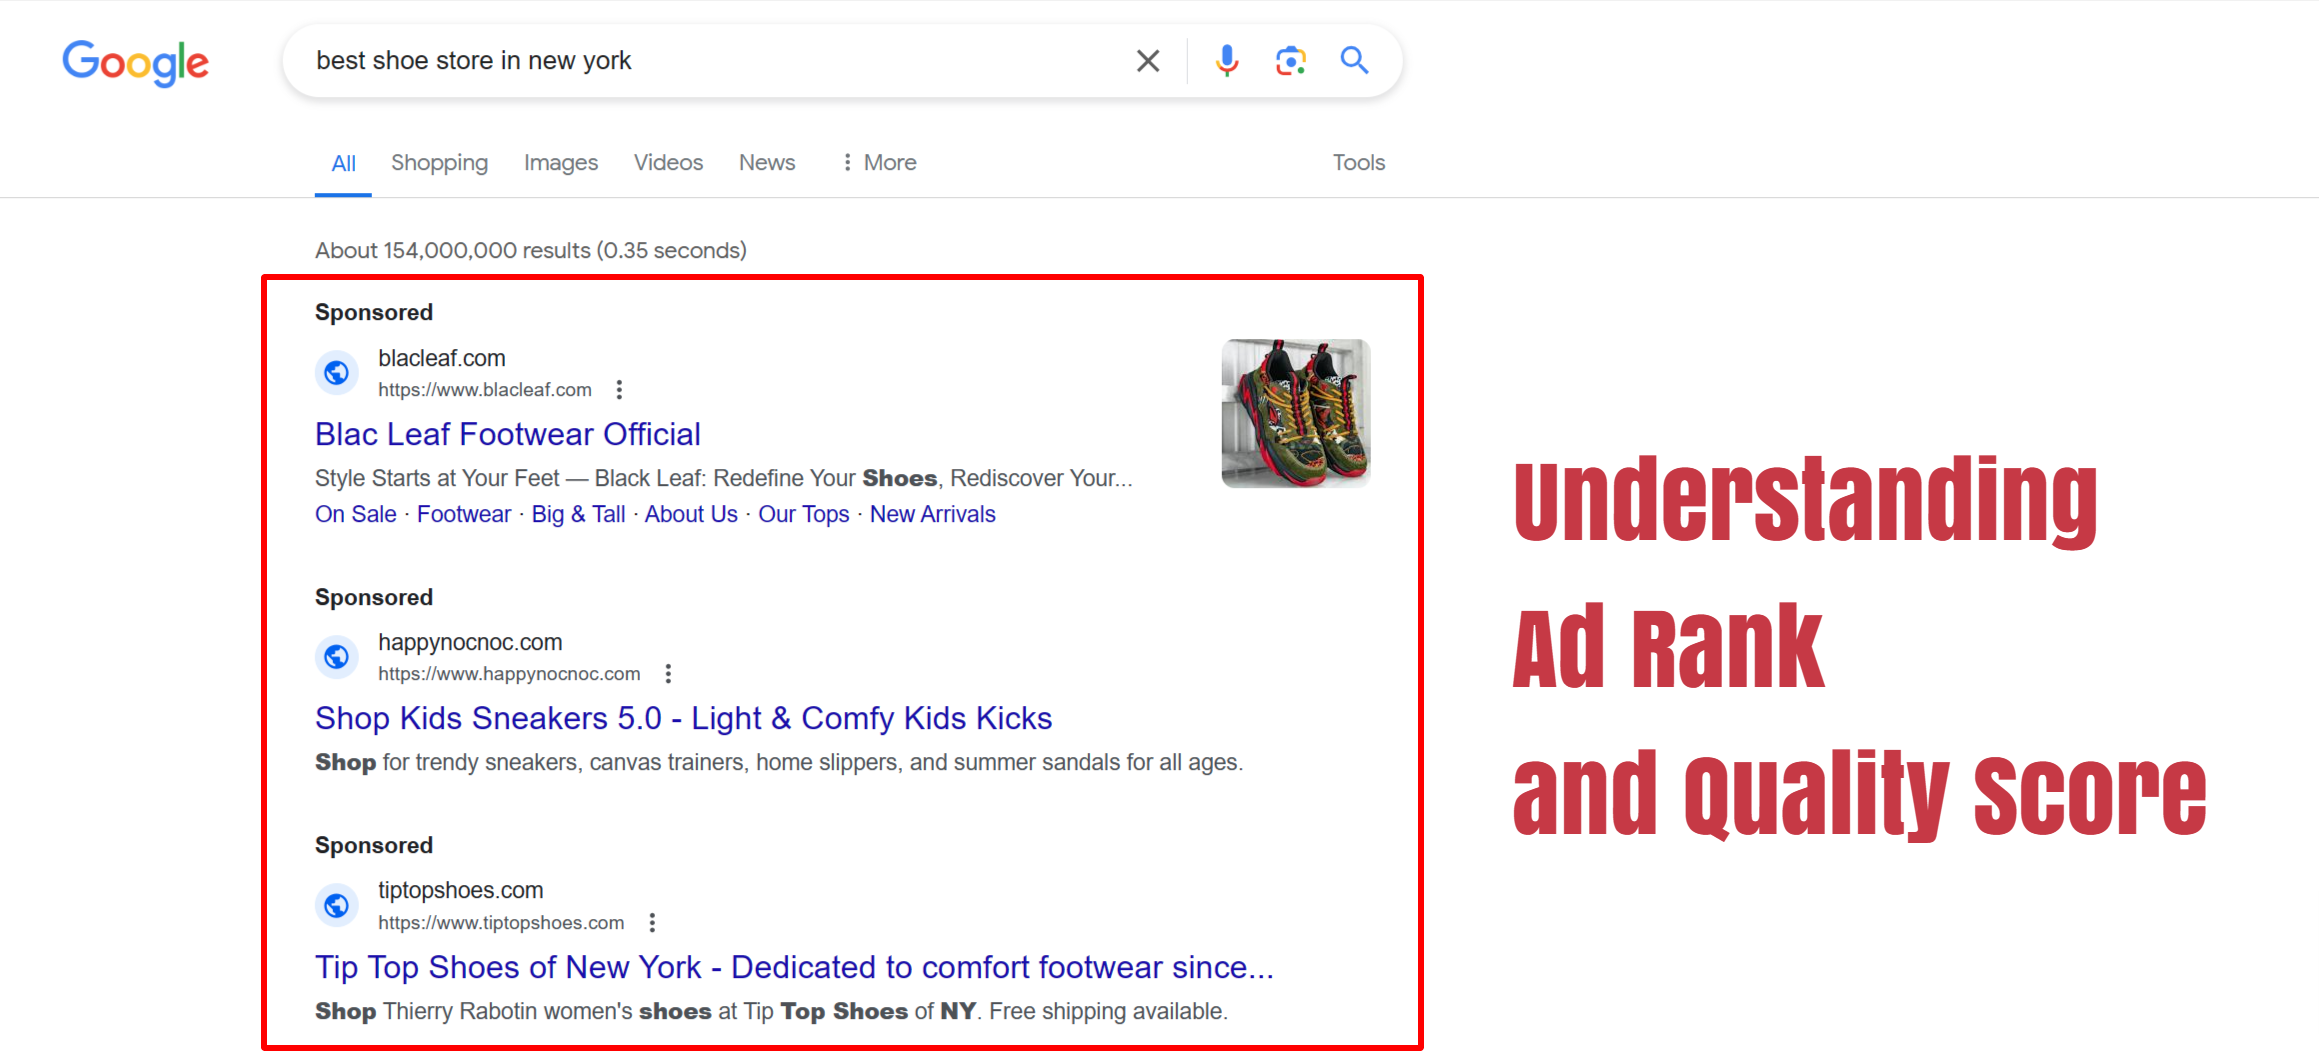 How to Improve Your Google Ads Position Without Increasing Bids